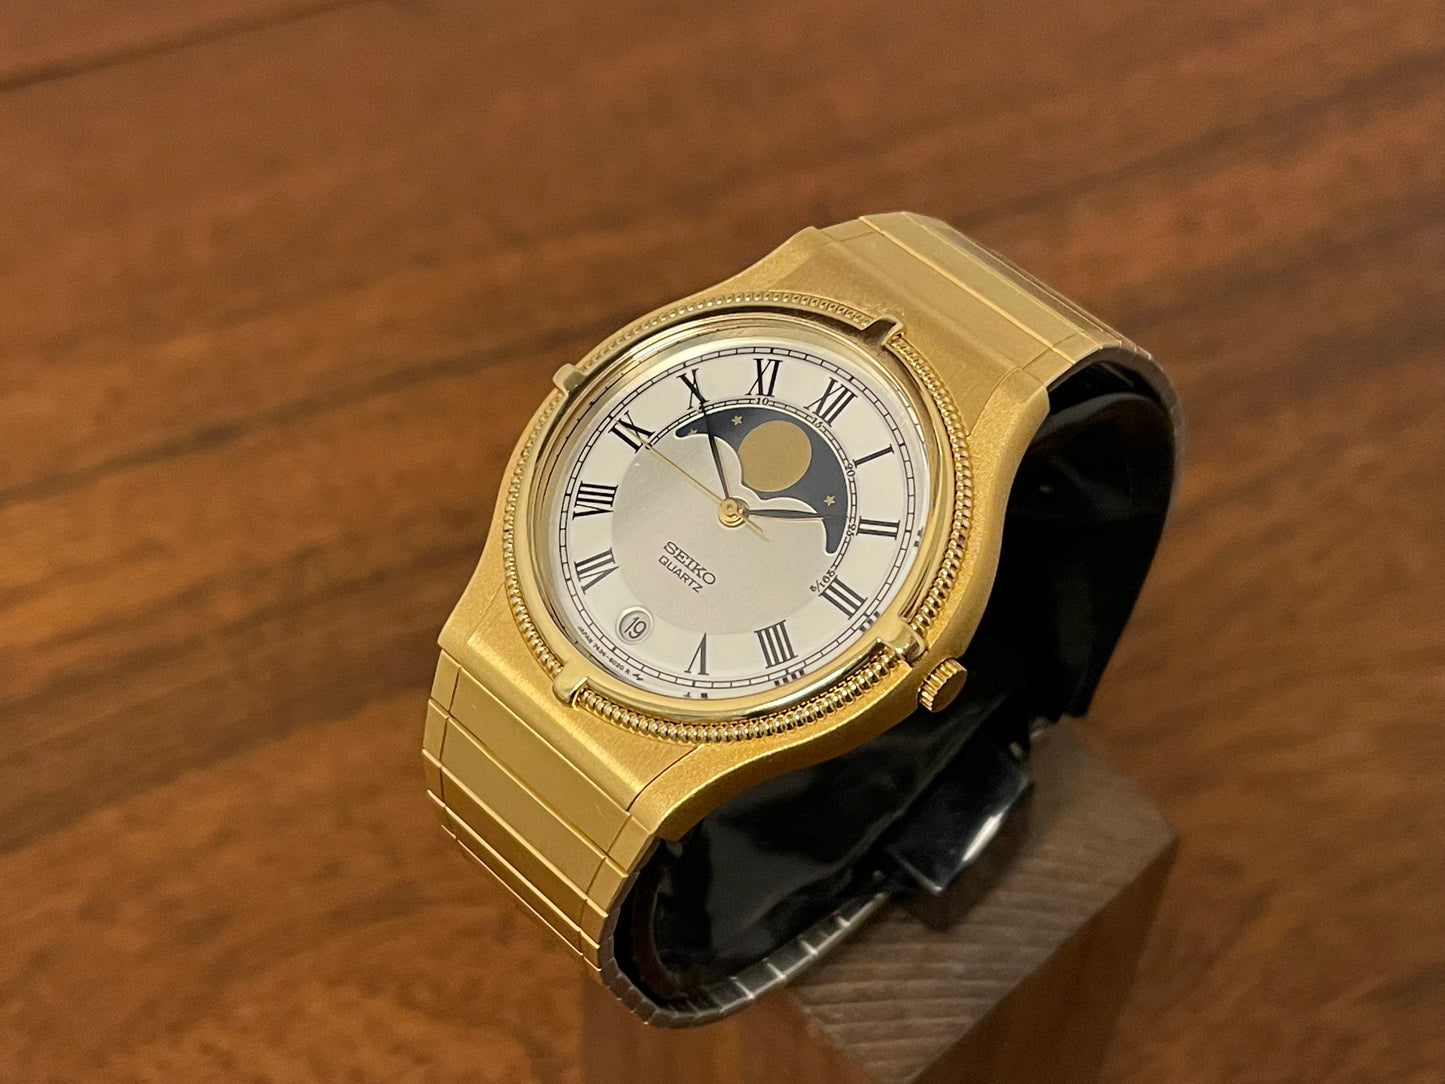 (1985) Seiko 7434-6010 gold colored dress watch with moon phase (NOS)